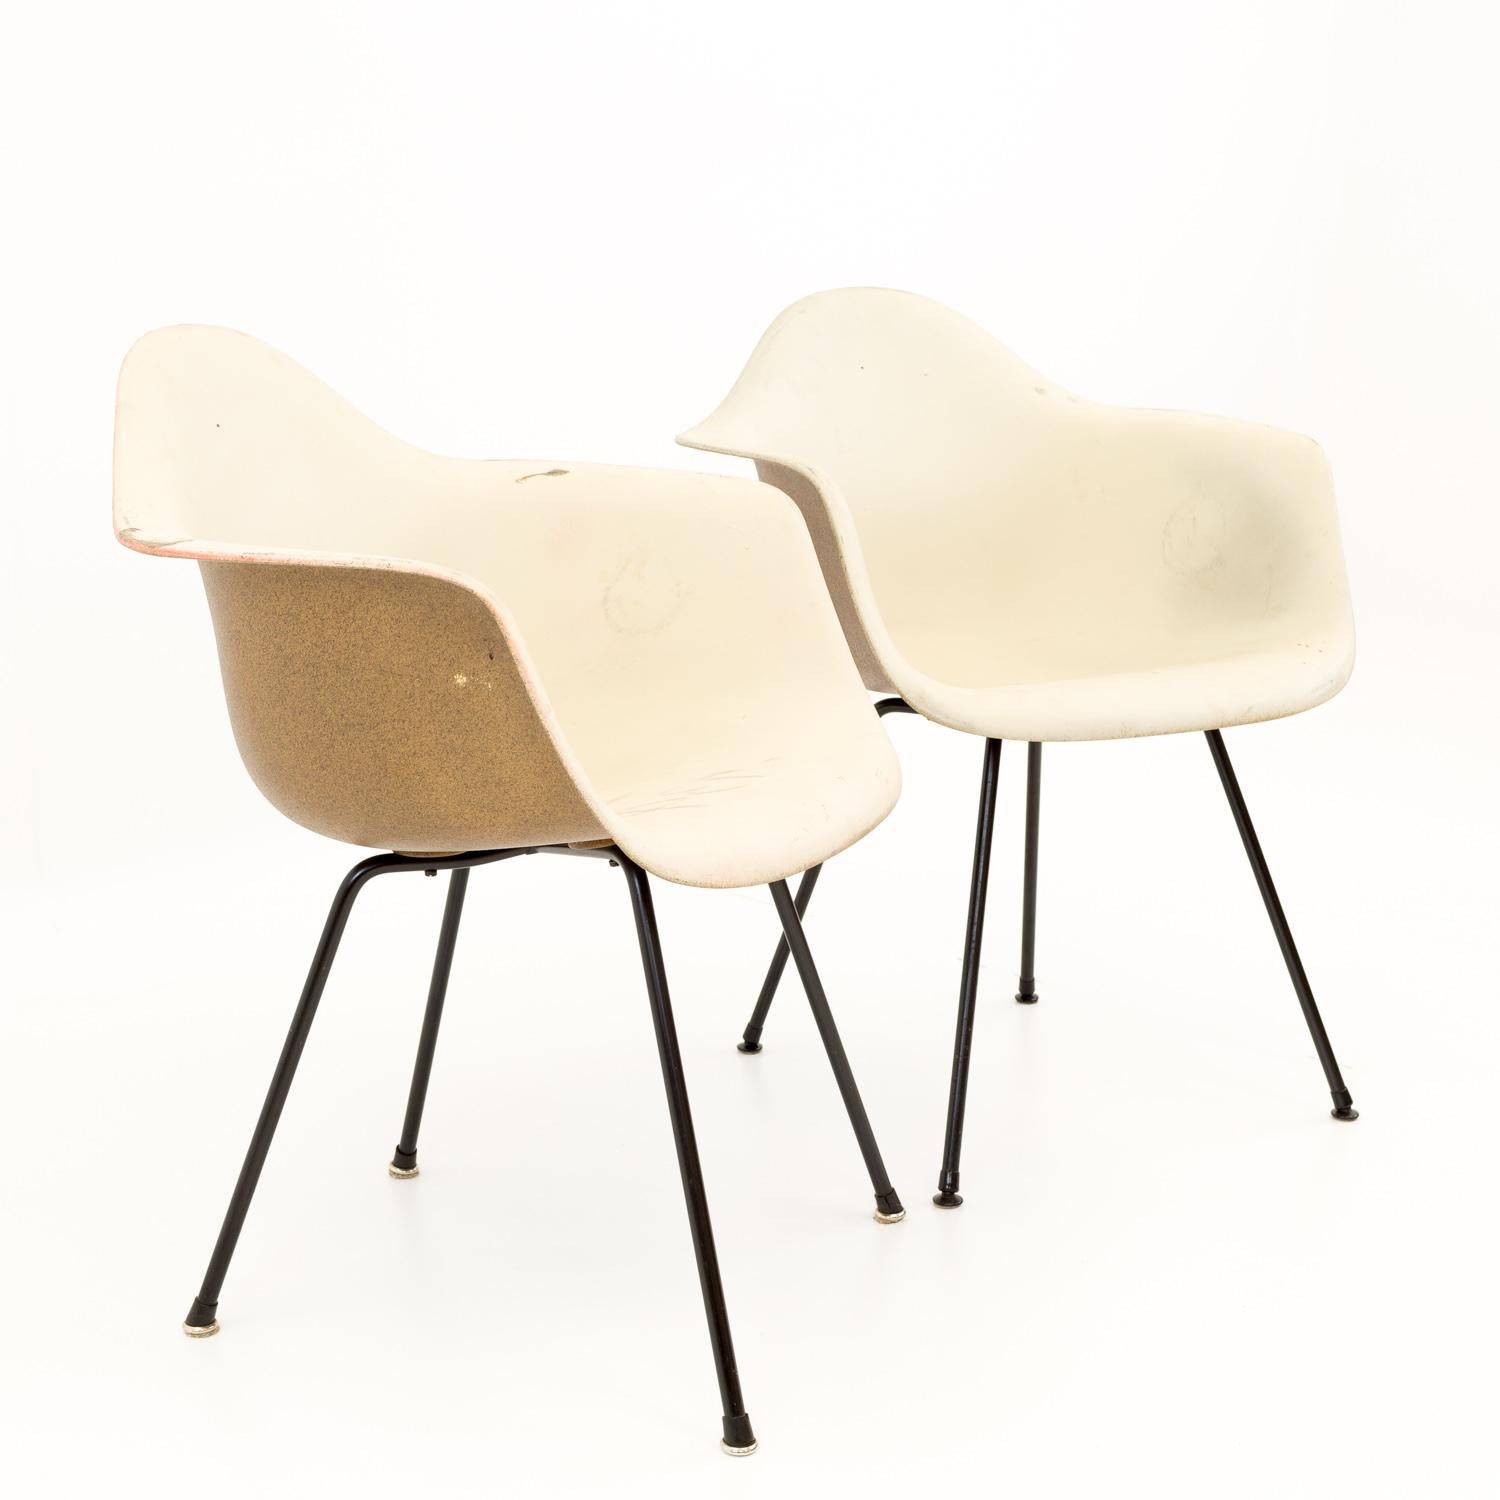 Eames for Herman Miller mid century molded plastic x-base shell chairs - pair.

Measures: 24.75 wide x 22.5 deep x 31 high with a seat height of 16.5 inches.

All pieces of furniture can be had in what we call restored vintage condition. That